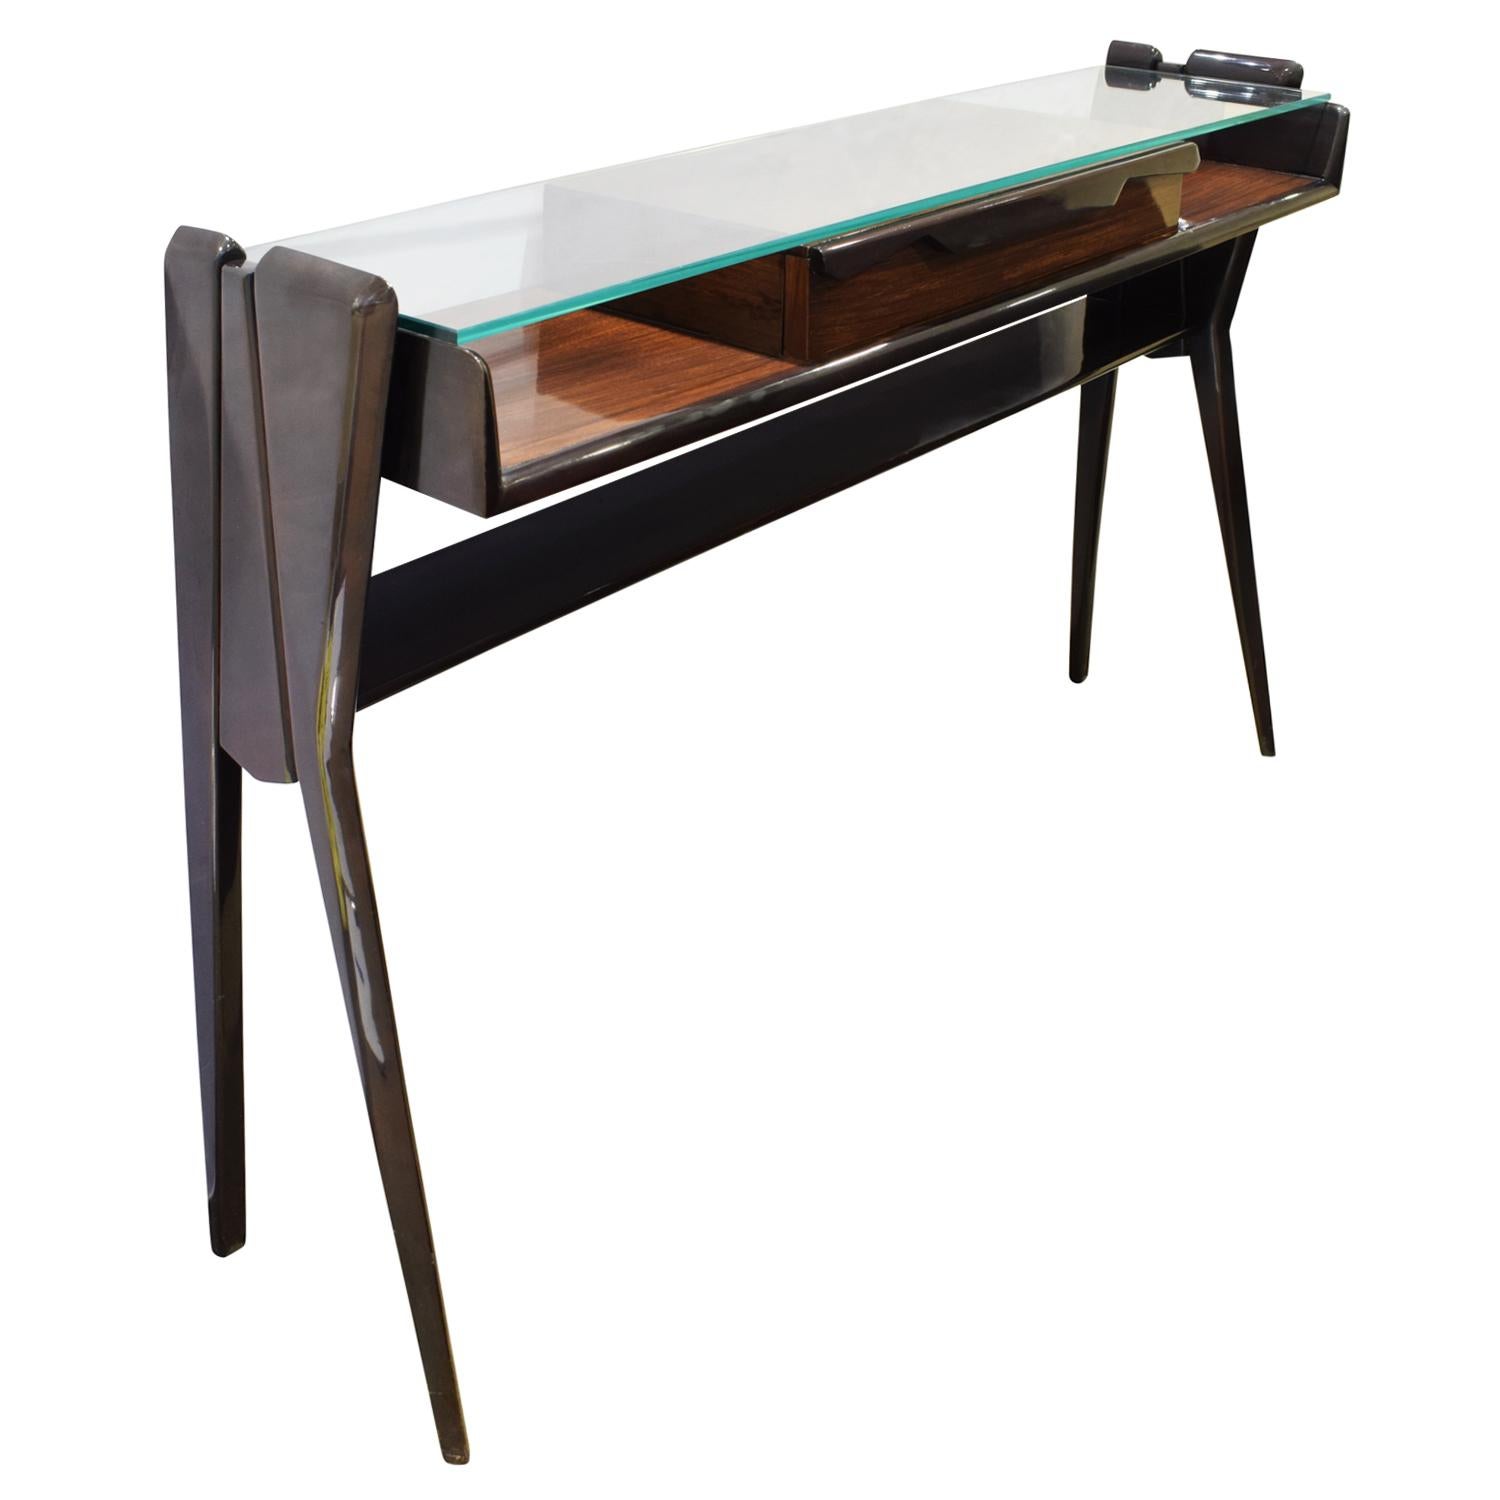 Sculptural console table in dark walnut, narrow with single drawer and glass top, Italian 1950's (signed on bottom “Mobili Pennati Egidio”). This is a very elegant console table.